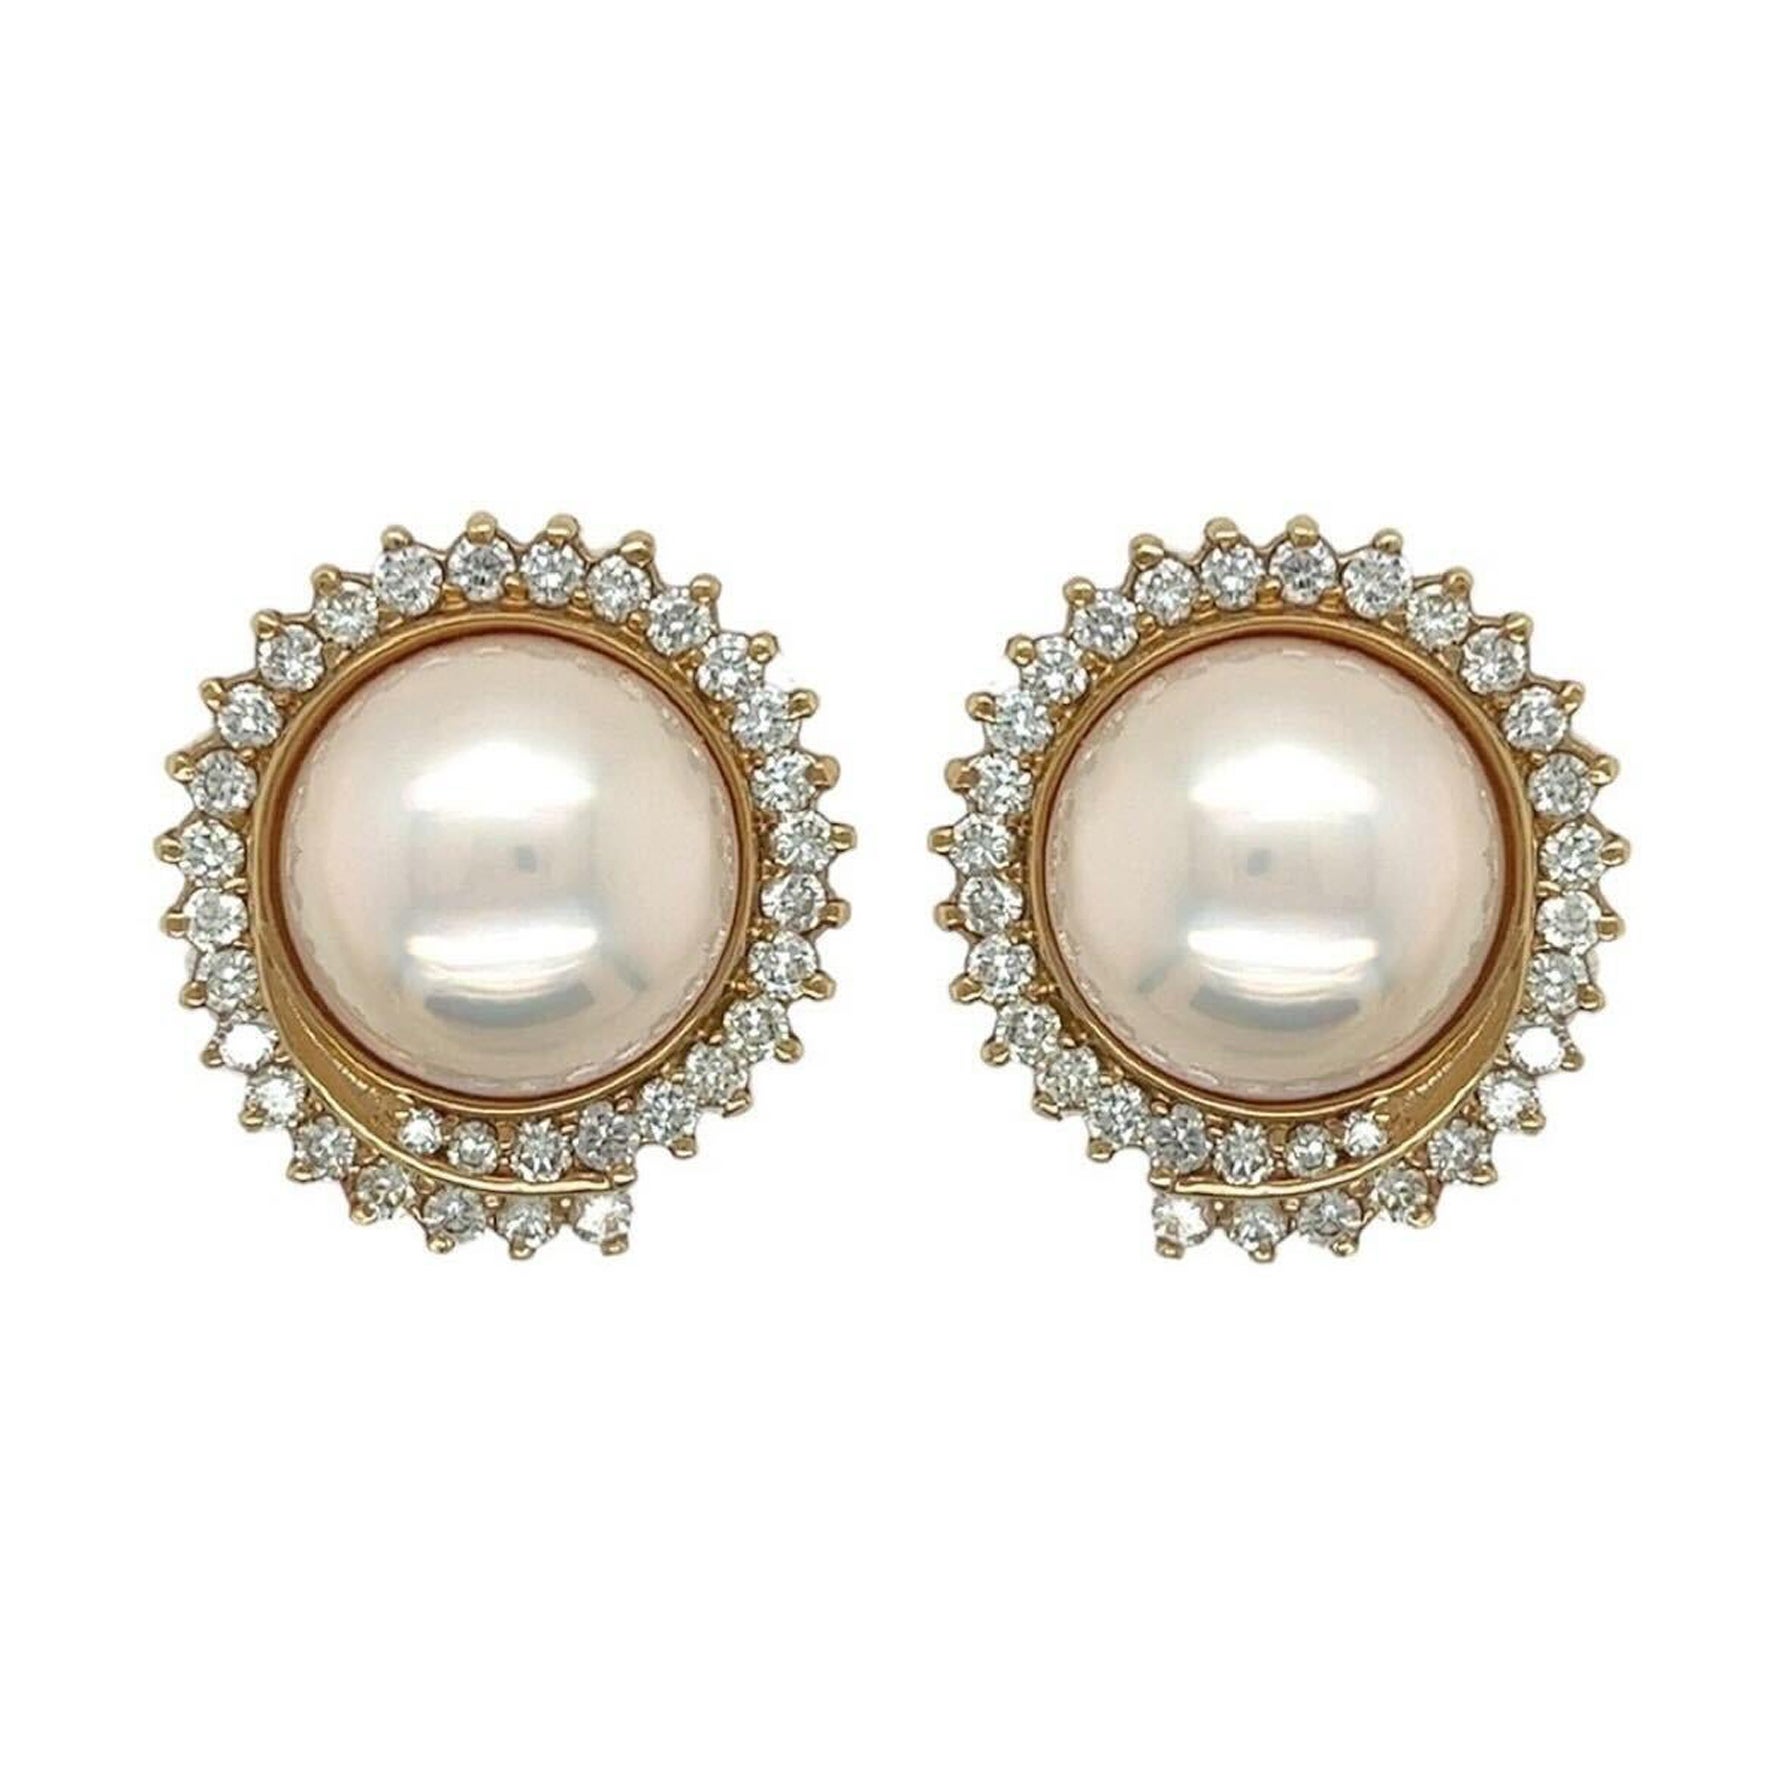 A Pair of Yellow Gold, Pearl and Diamond Earrings 